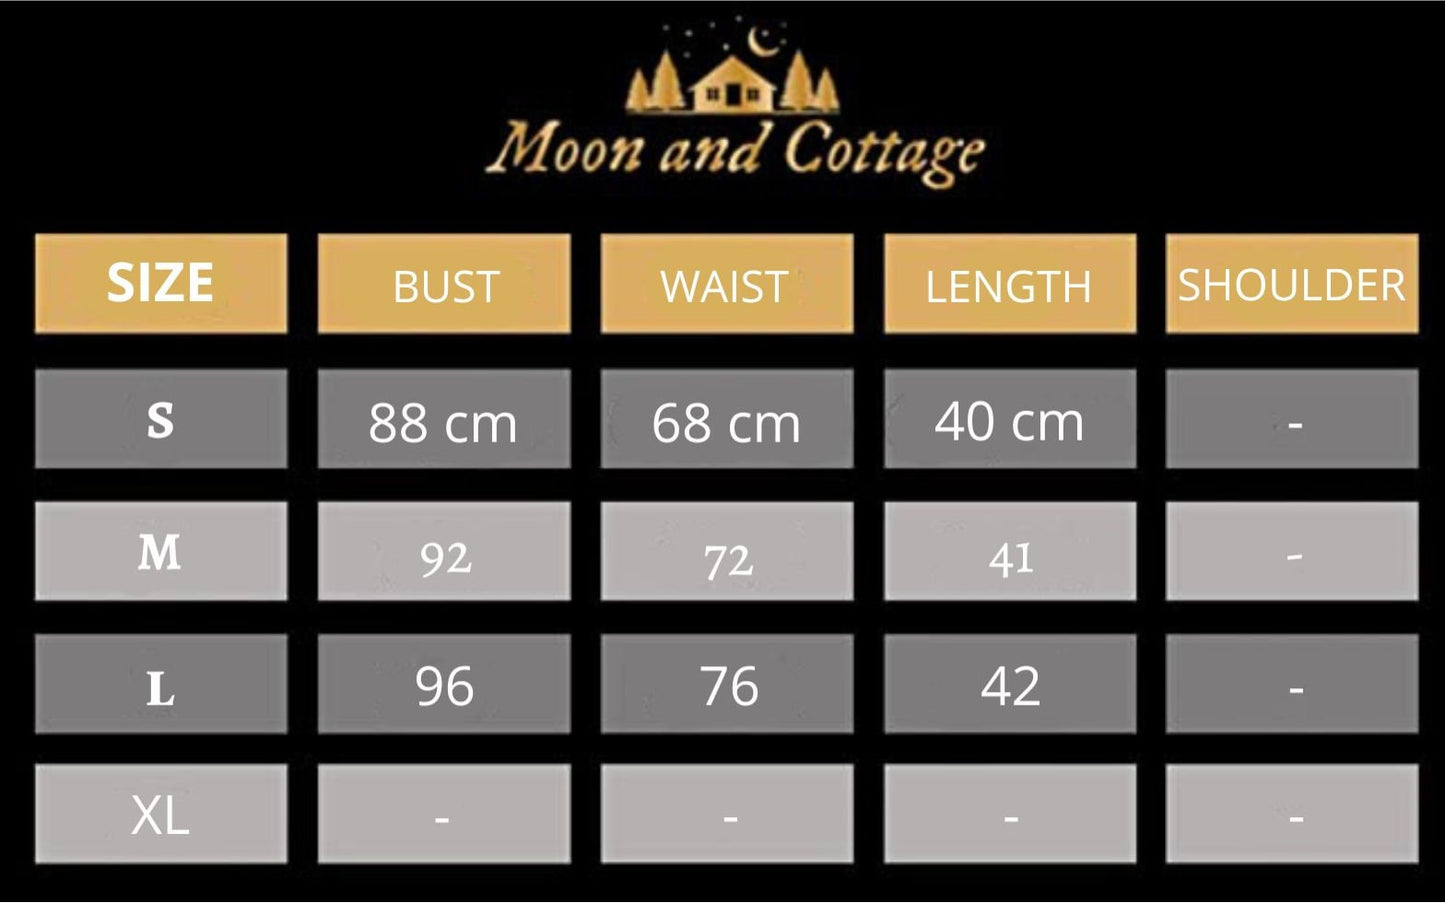 Y2k Button Up Sleeveless Women Crop Top, Cottagecore Lacework Backless Shirt, Vintage Fashion Camis, Hight Street Casual Vest Tee